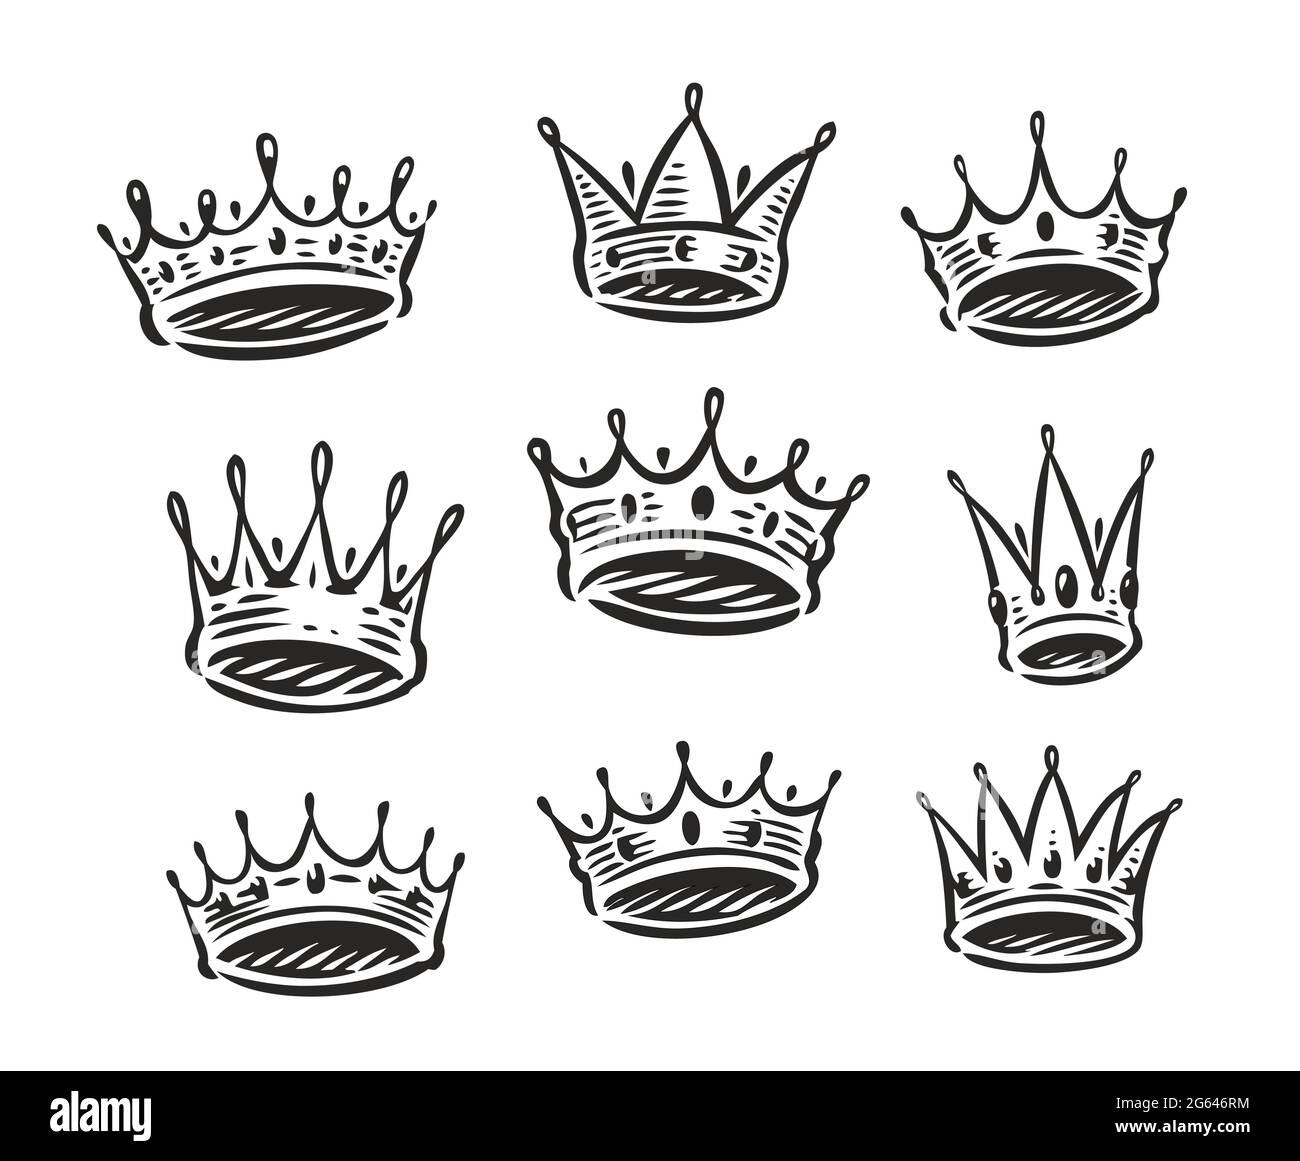 Top more than 154 crown symbol tattoo best